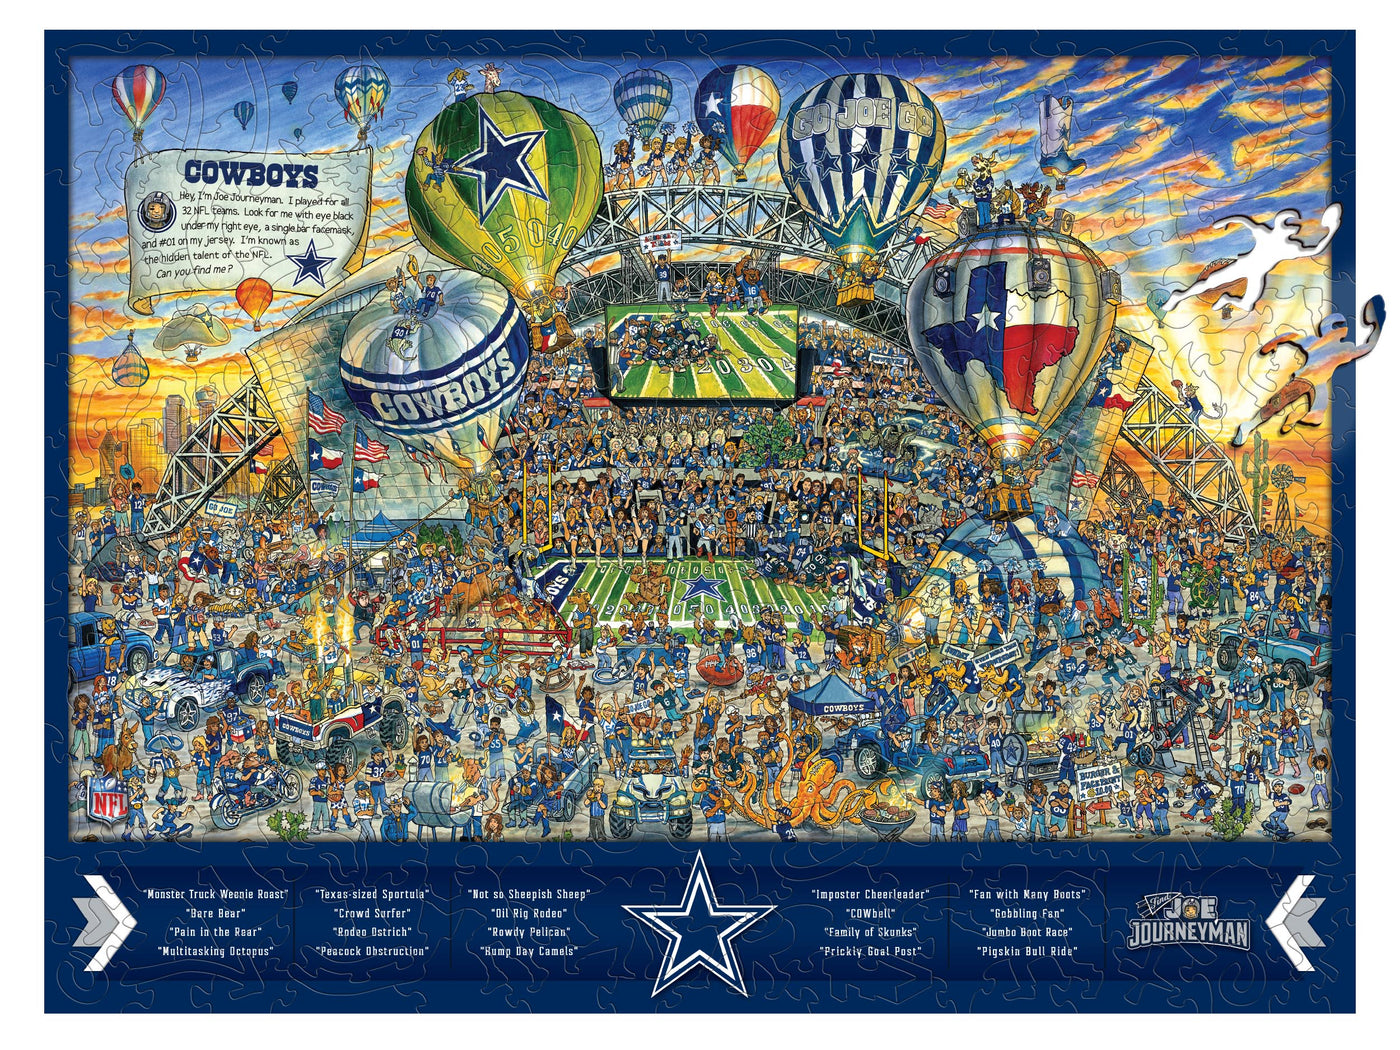 Dallas Cowboys "Joe Journeyman" 333-Piece Wooden Jigsaw Puzzle - Texas Time Gifts and Fine Art 